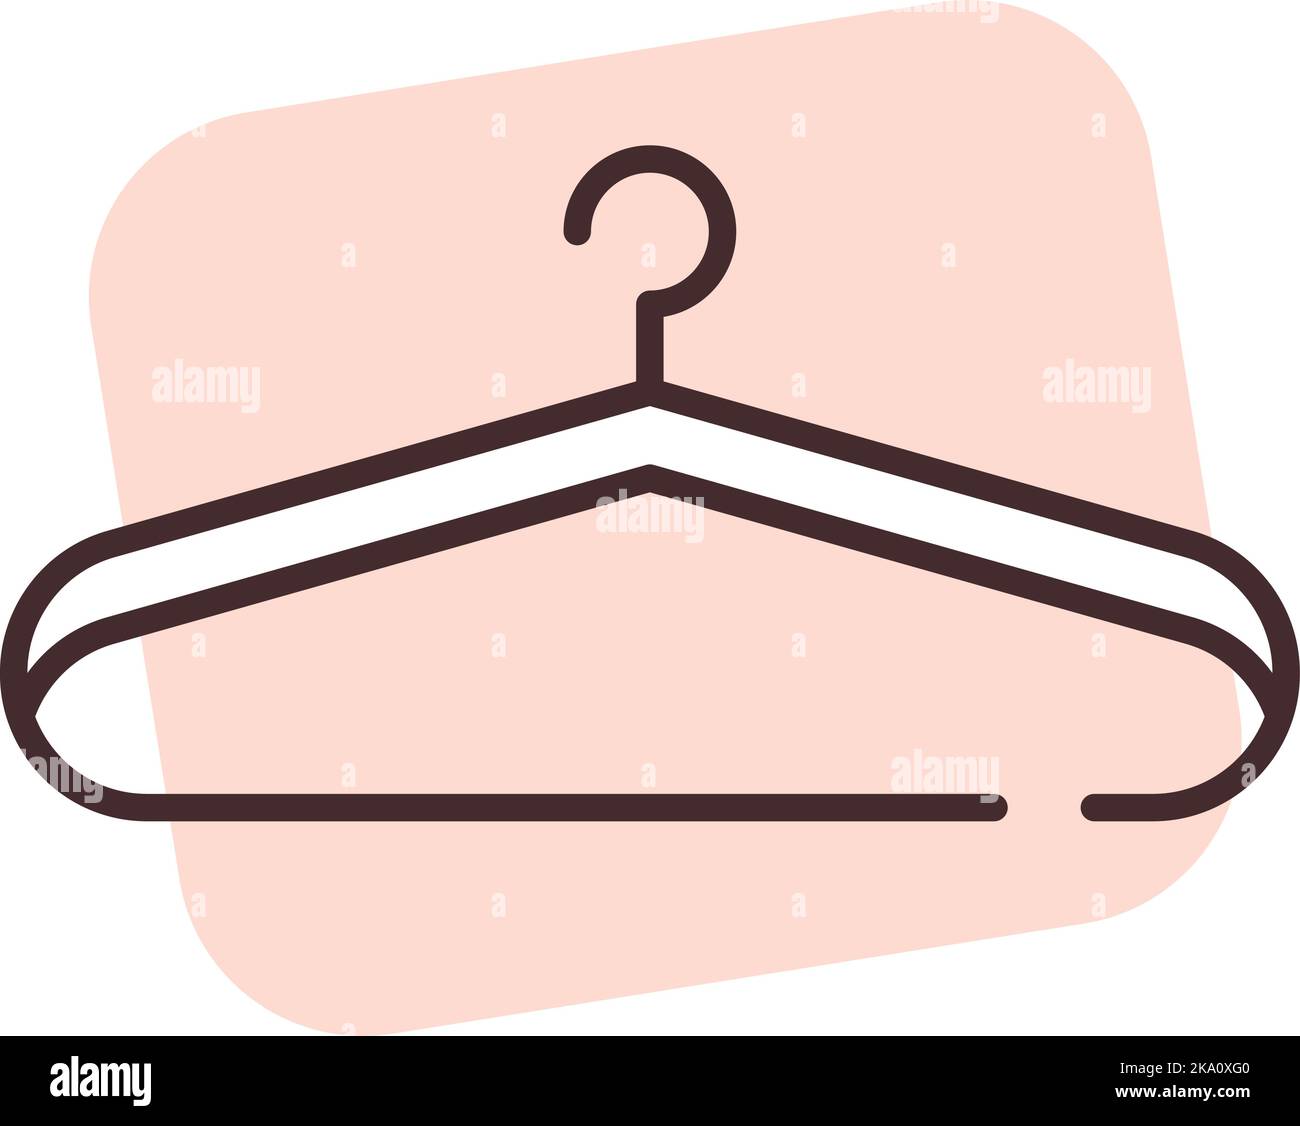 Cleaning  hangers, illustration or icon, vector on white background. Stock Vector